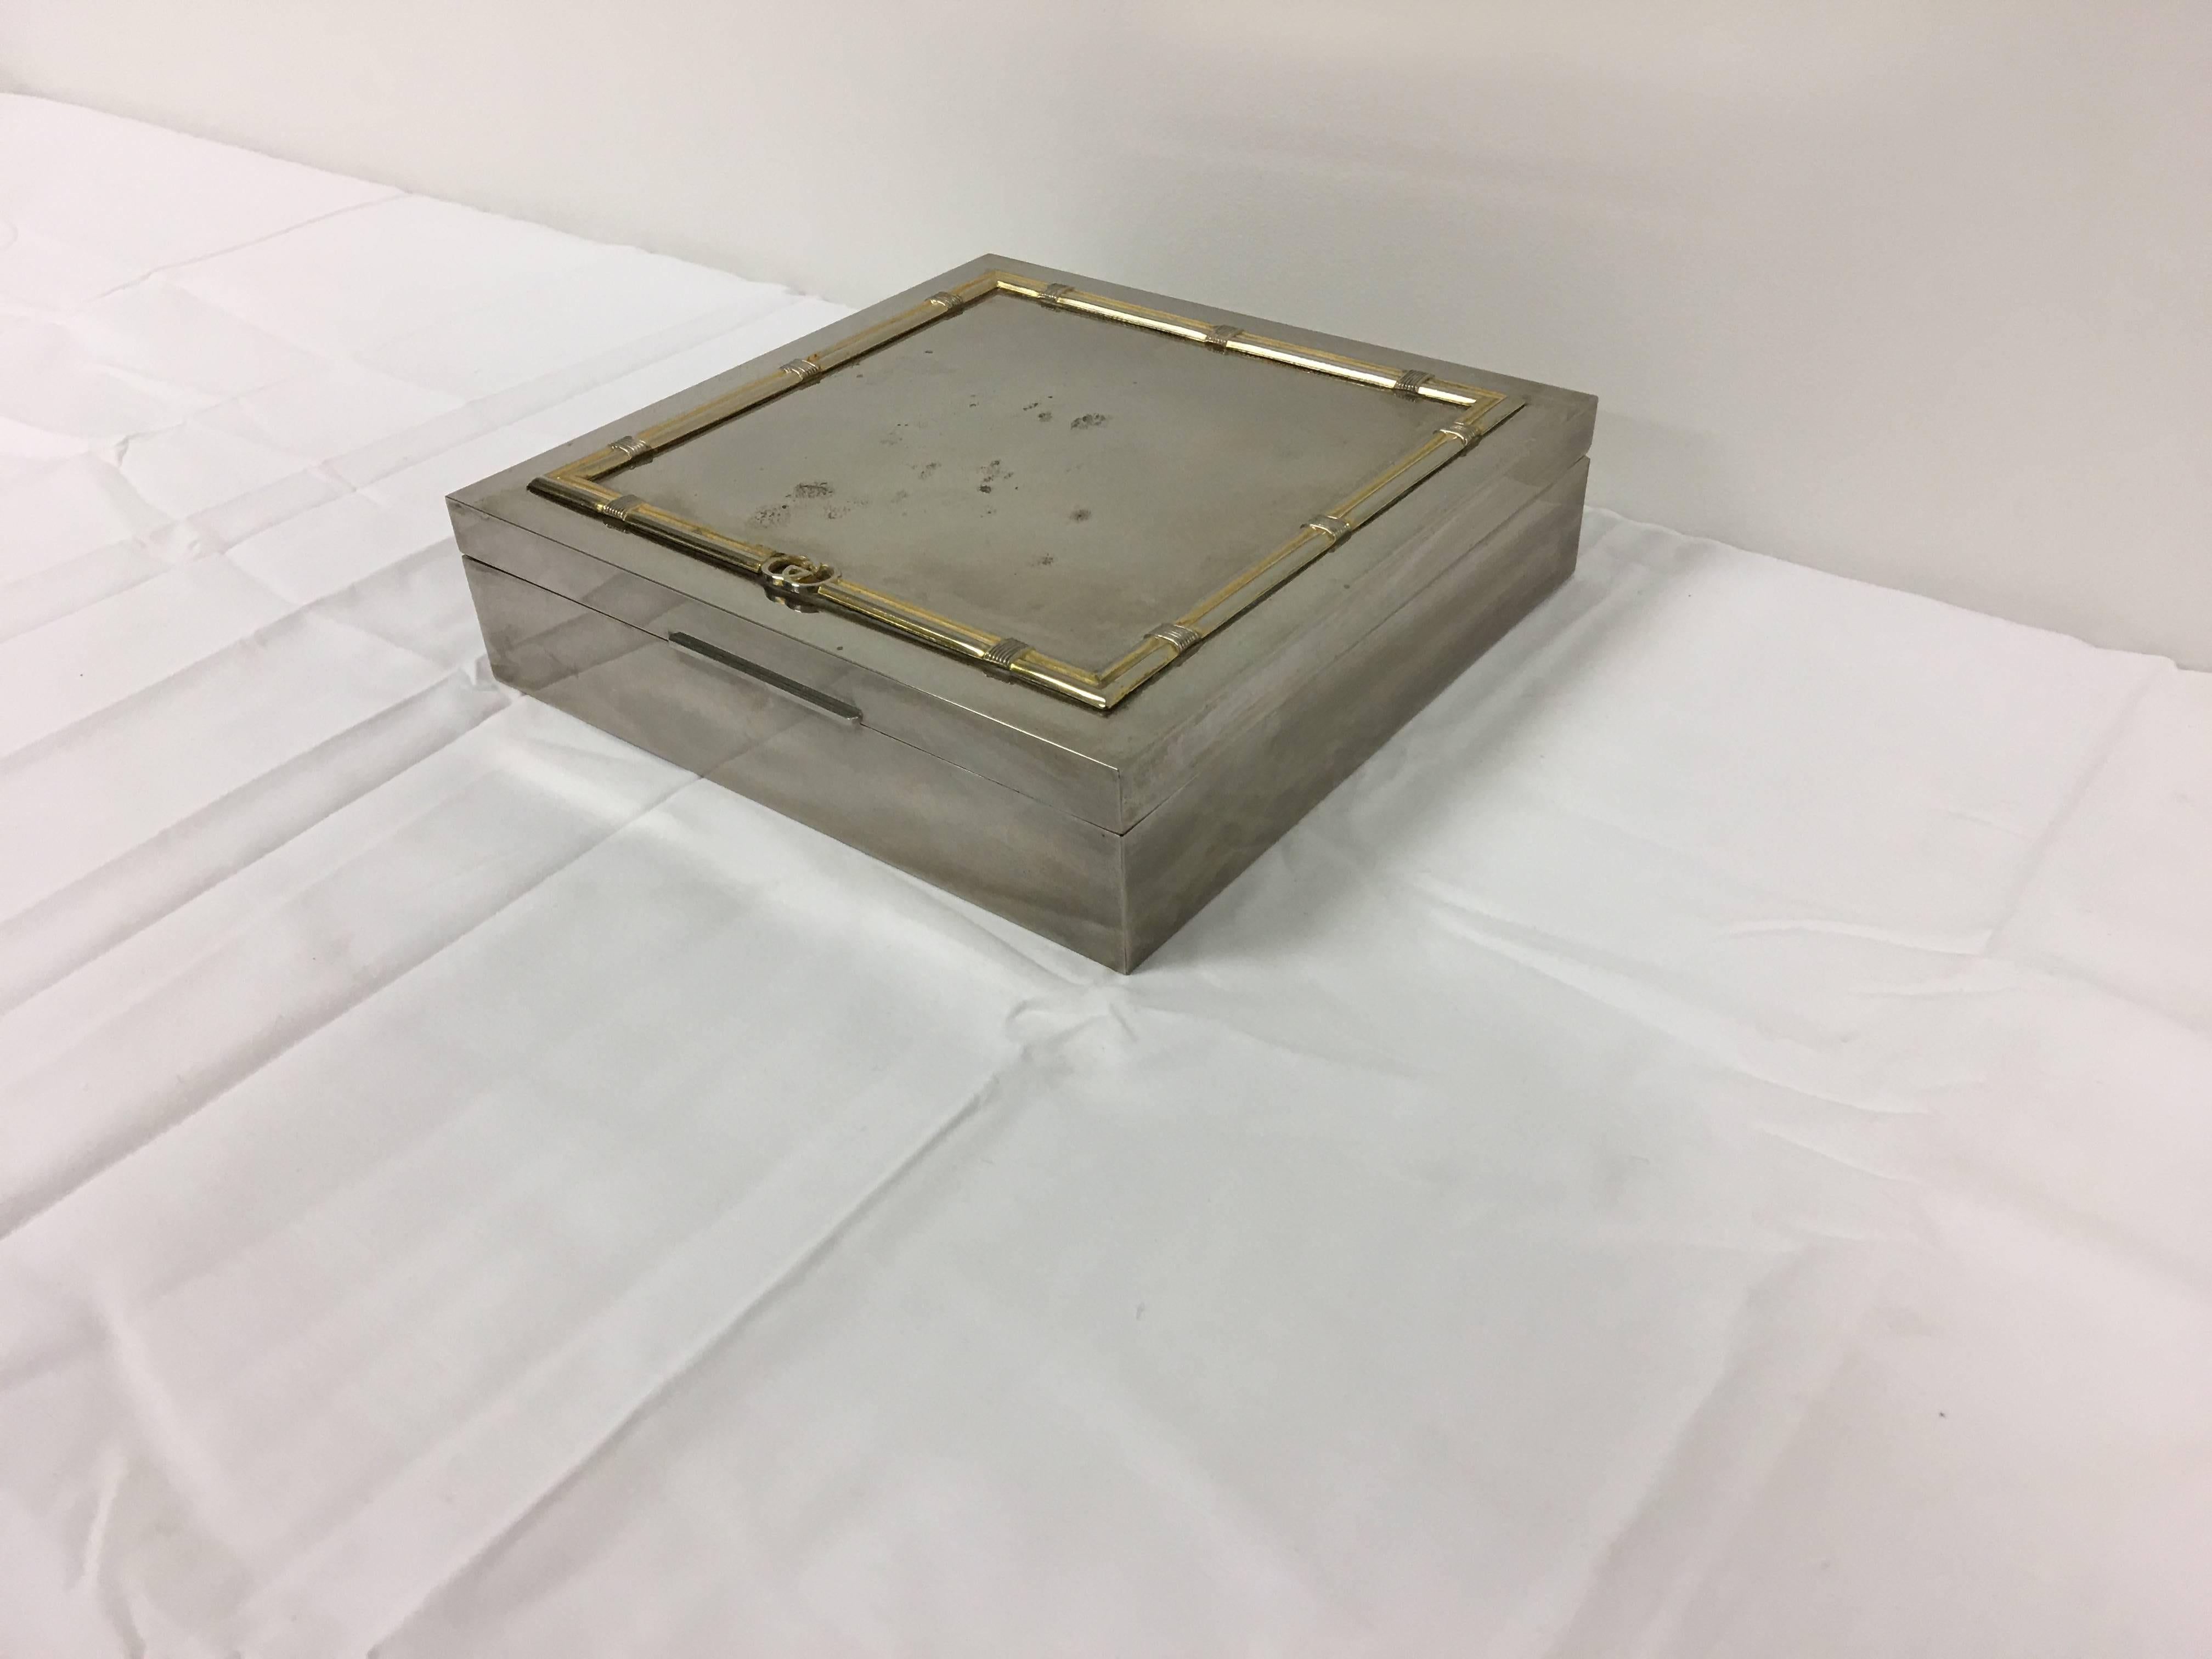 A fabulous, 1960s Gucci humidor cigar box. Silver and brass-plated, with a faux-bamboo border along the top. 

Marked: Gucci. Italy.